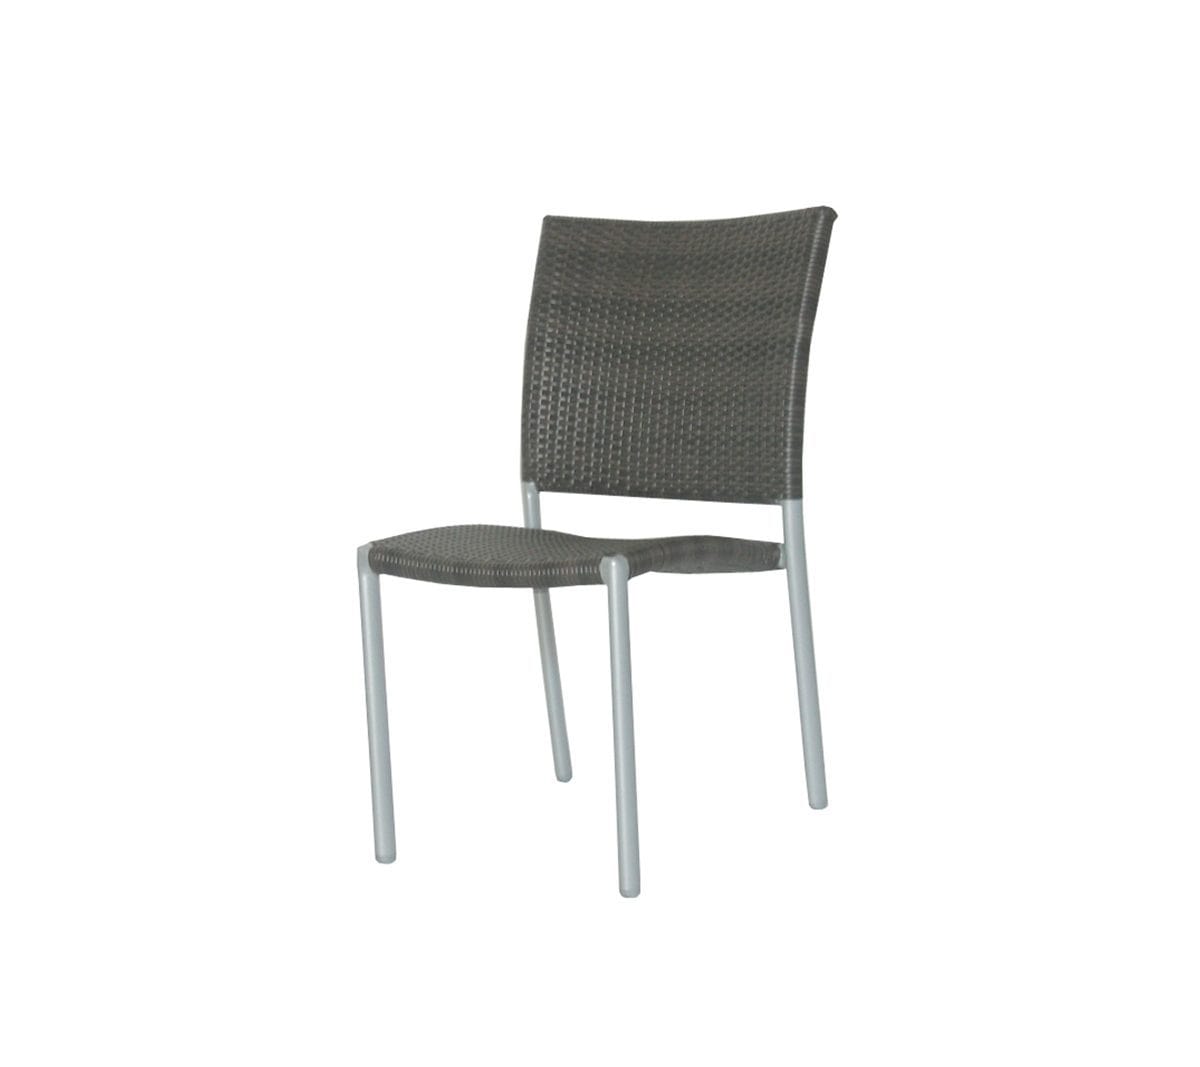 Ratana Dining New Roma Stacking Side Chair Woven